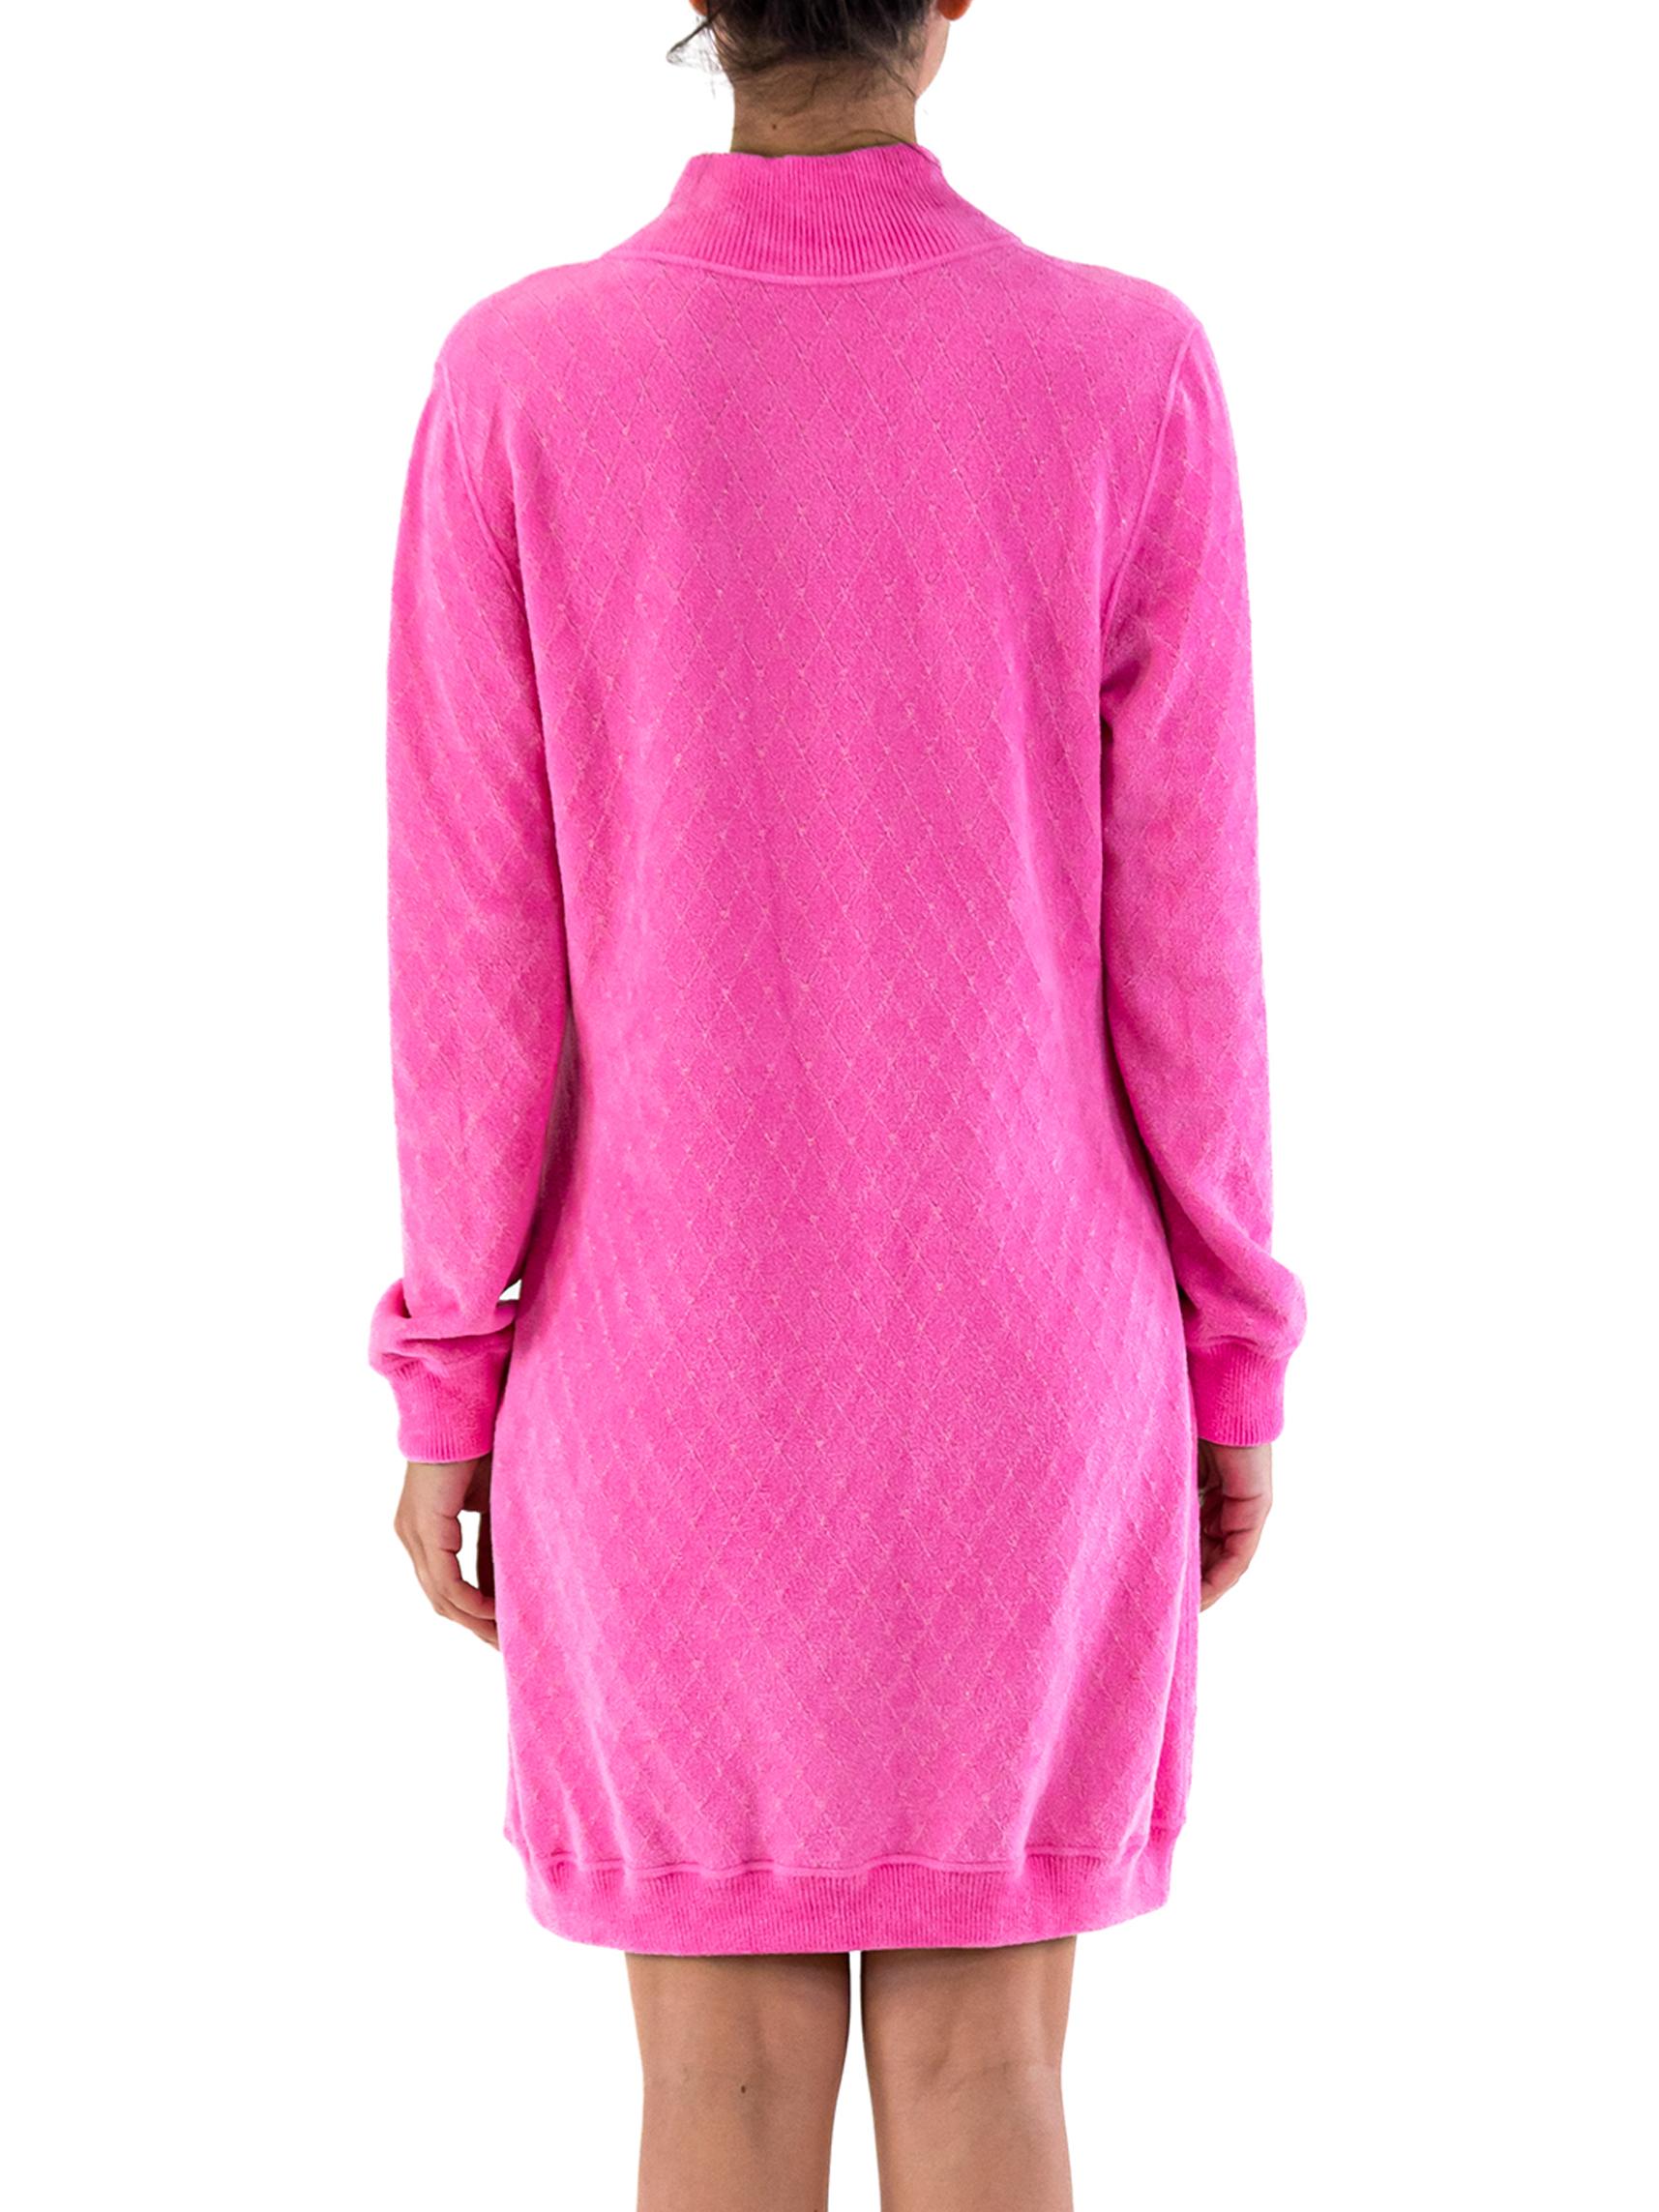 Women's 2000S Chanel Hot Pink Velour Dress For Sale